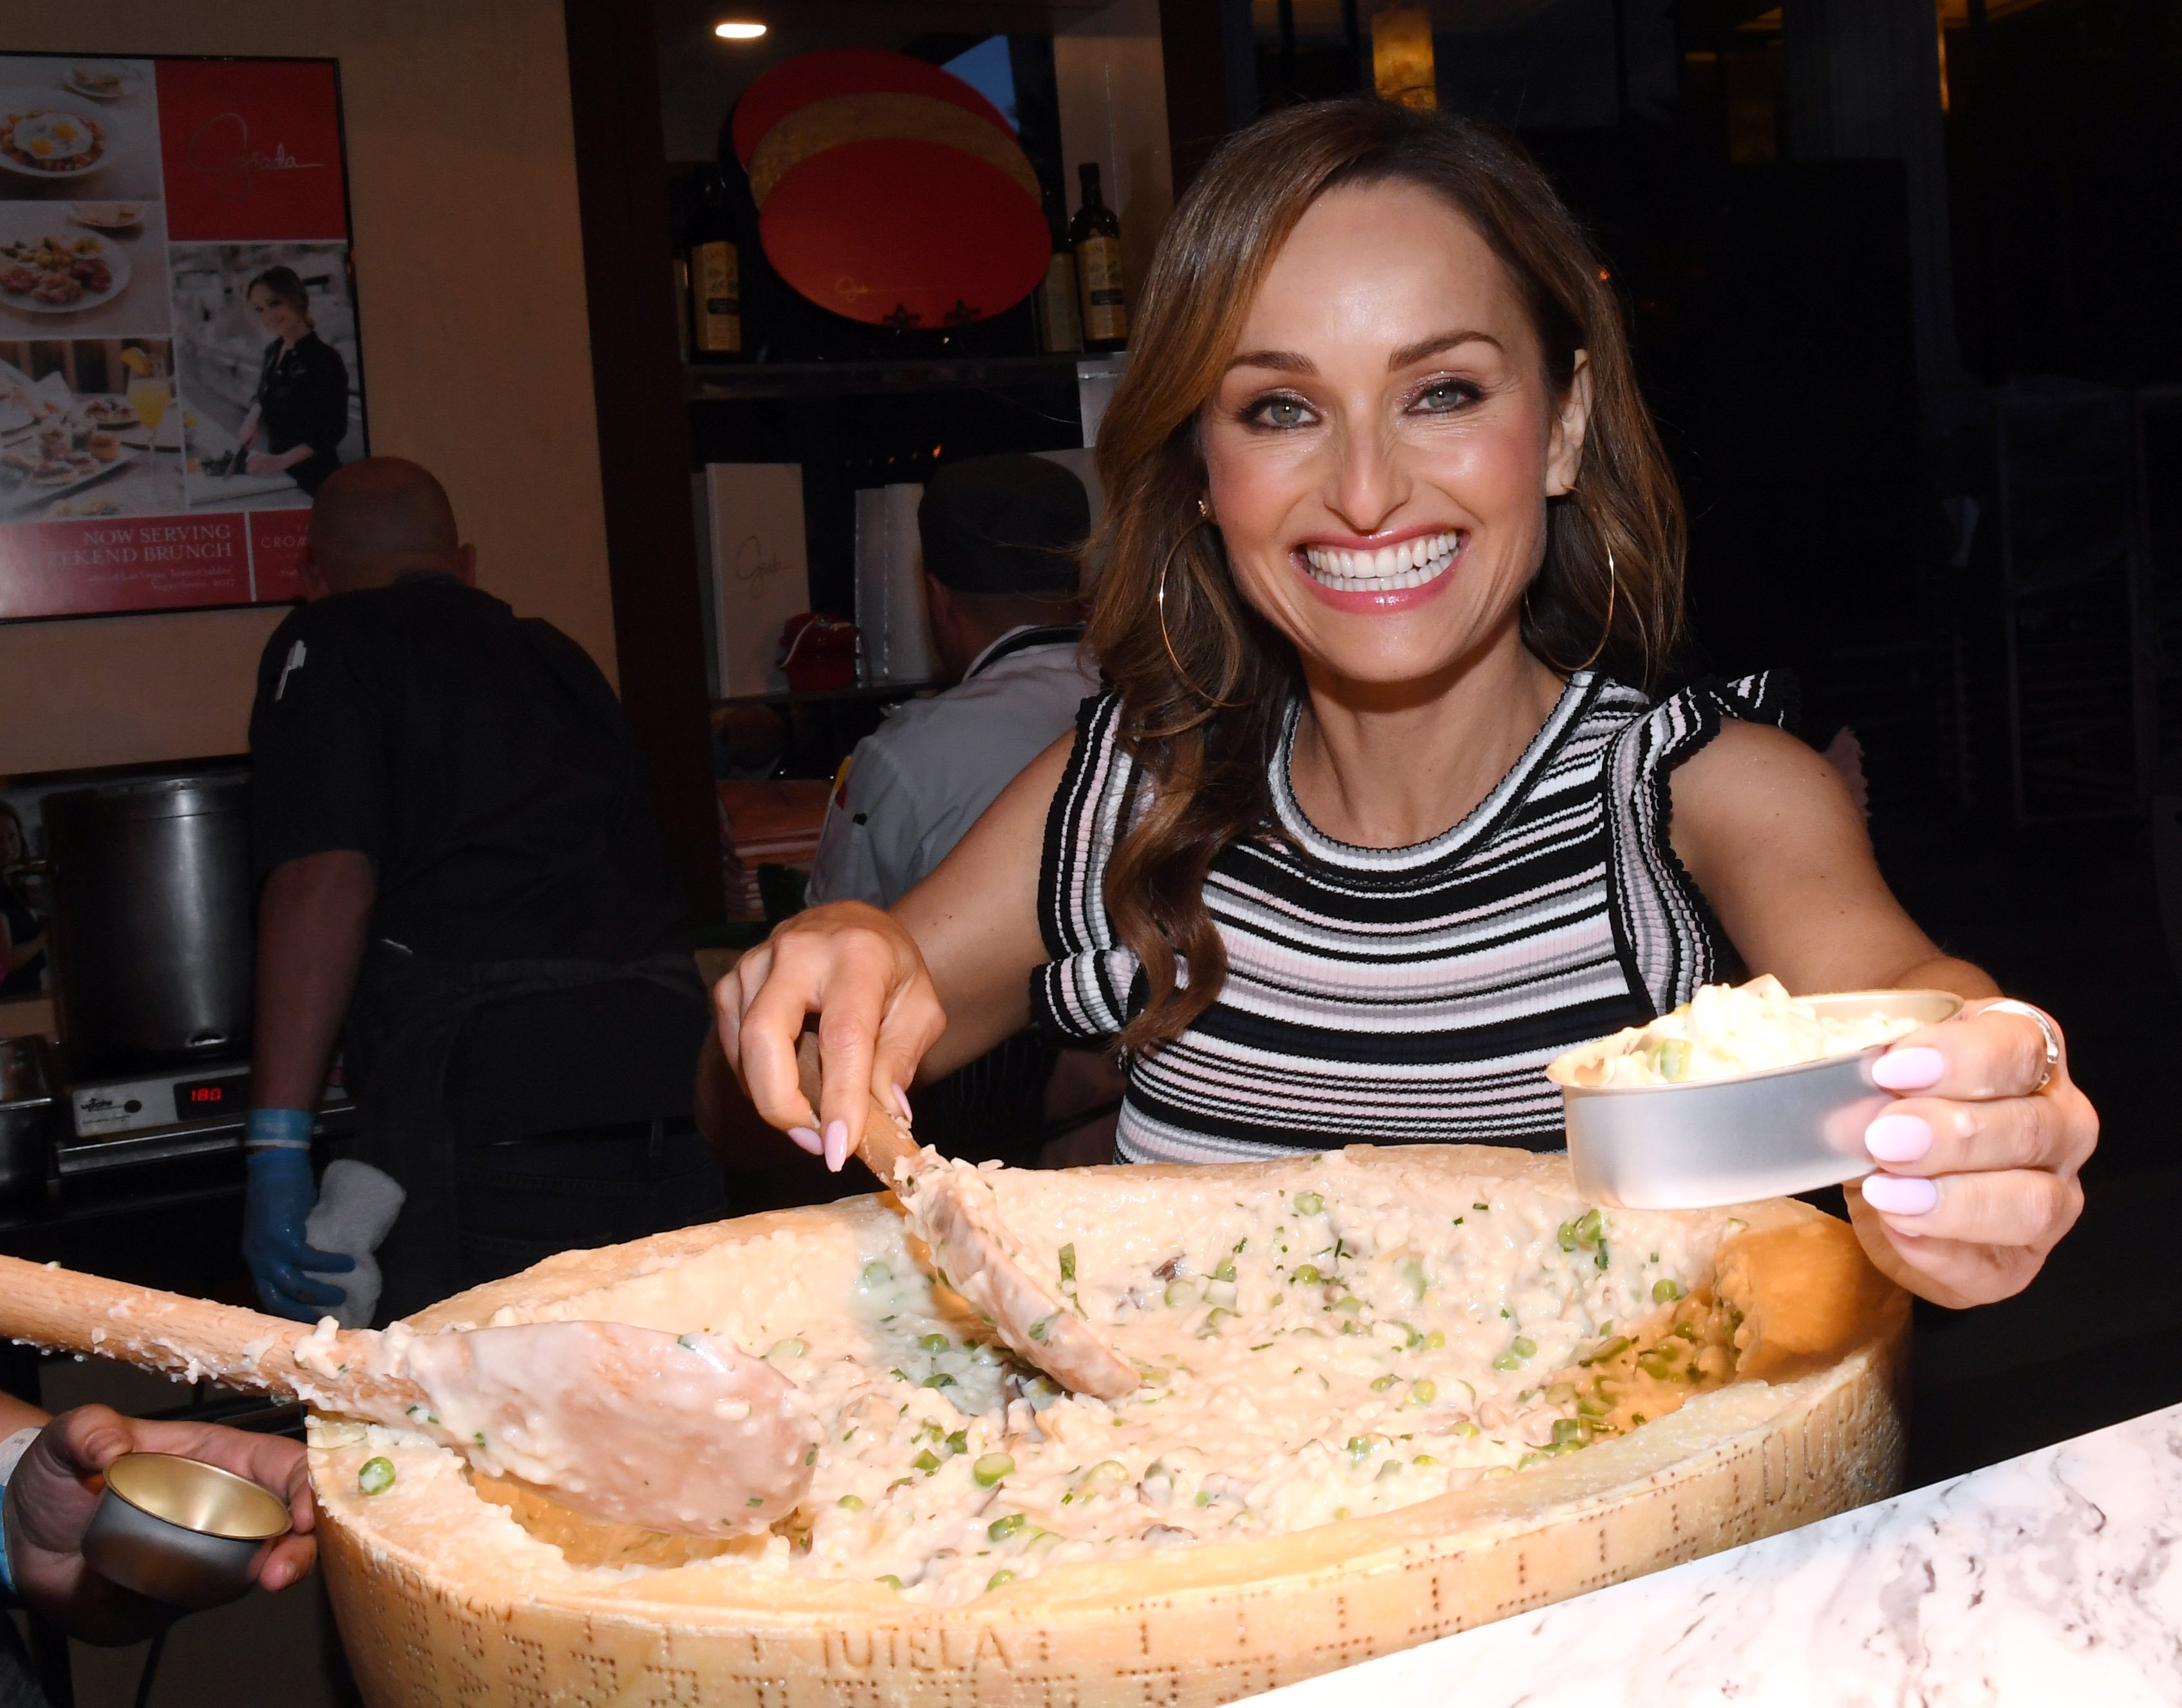 Chef Giada De Laurentiis serves risotto primavera at the Giada restaurant booth at the 13th annual Vegas Uncork'd by Bon Appetit Grand Tasting event presented by the Las Vegas Convention and Visitors Authority at Caesars Palace